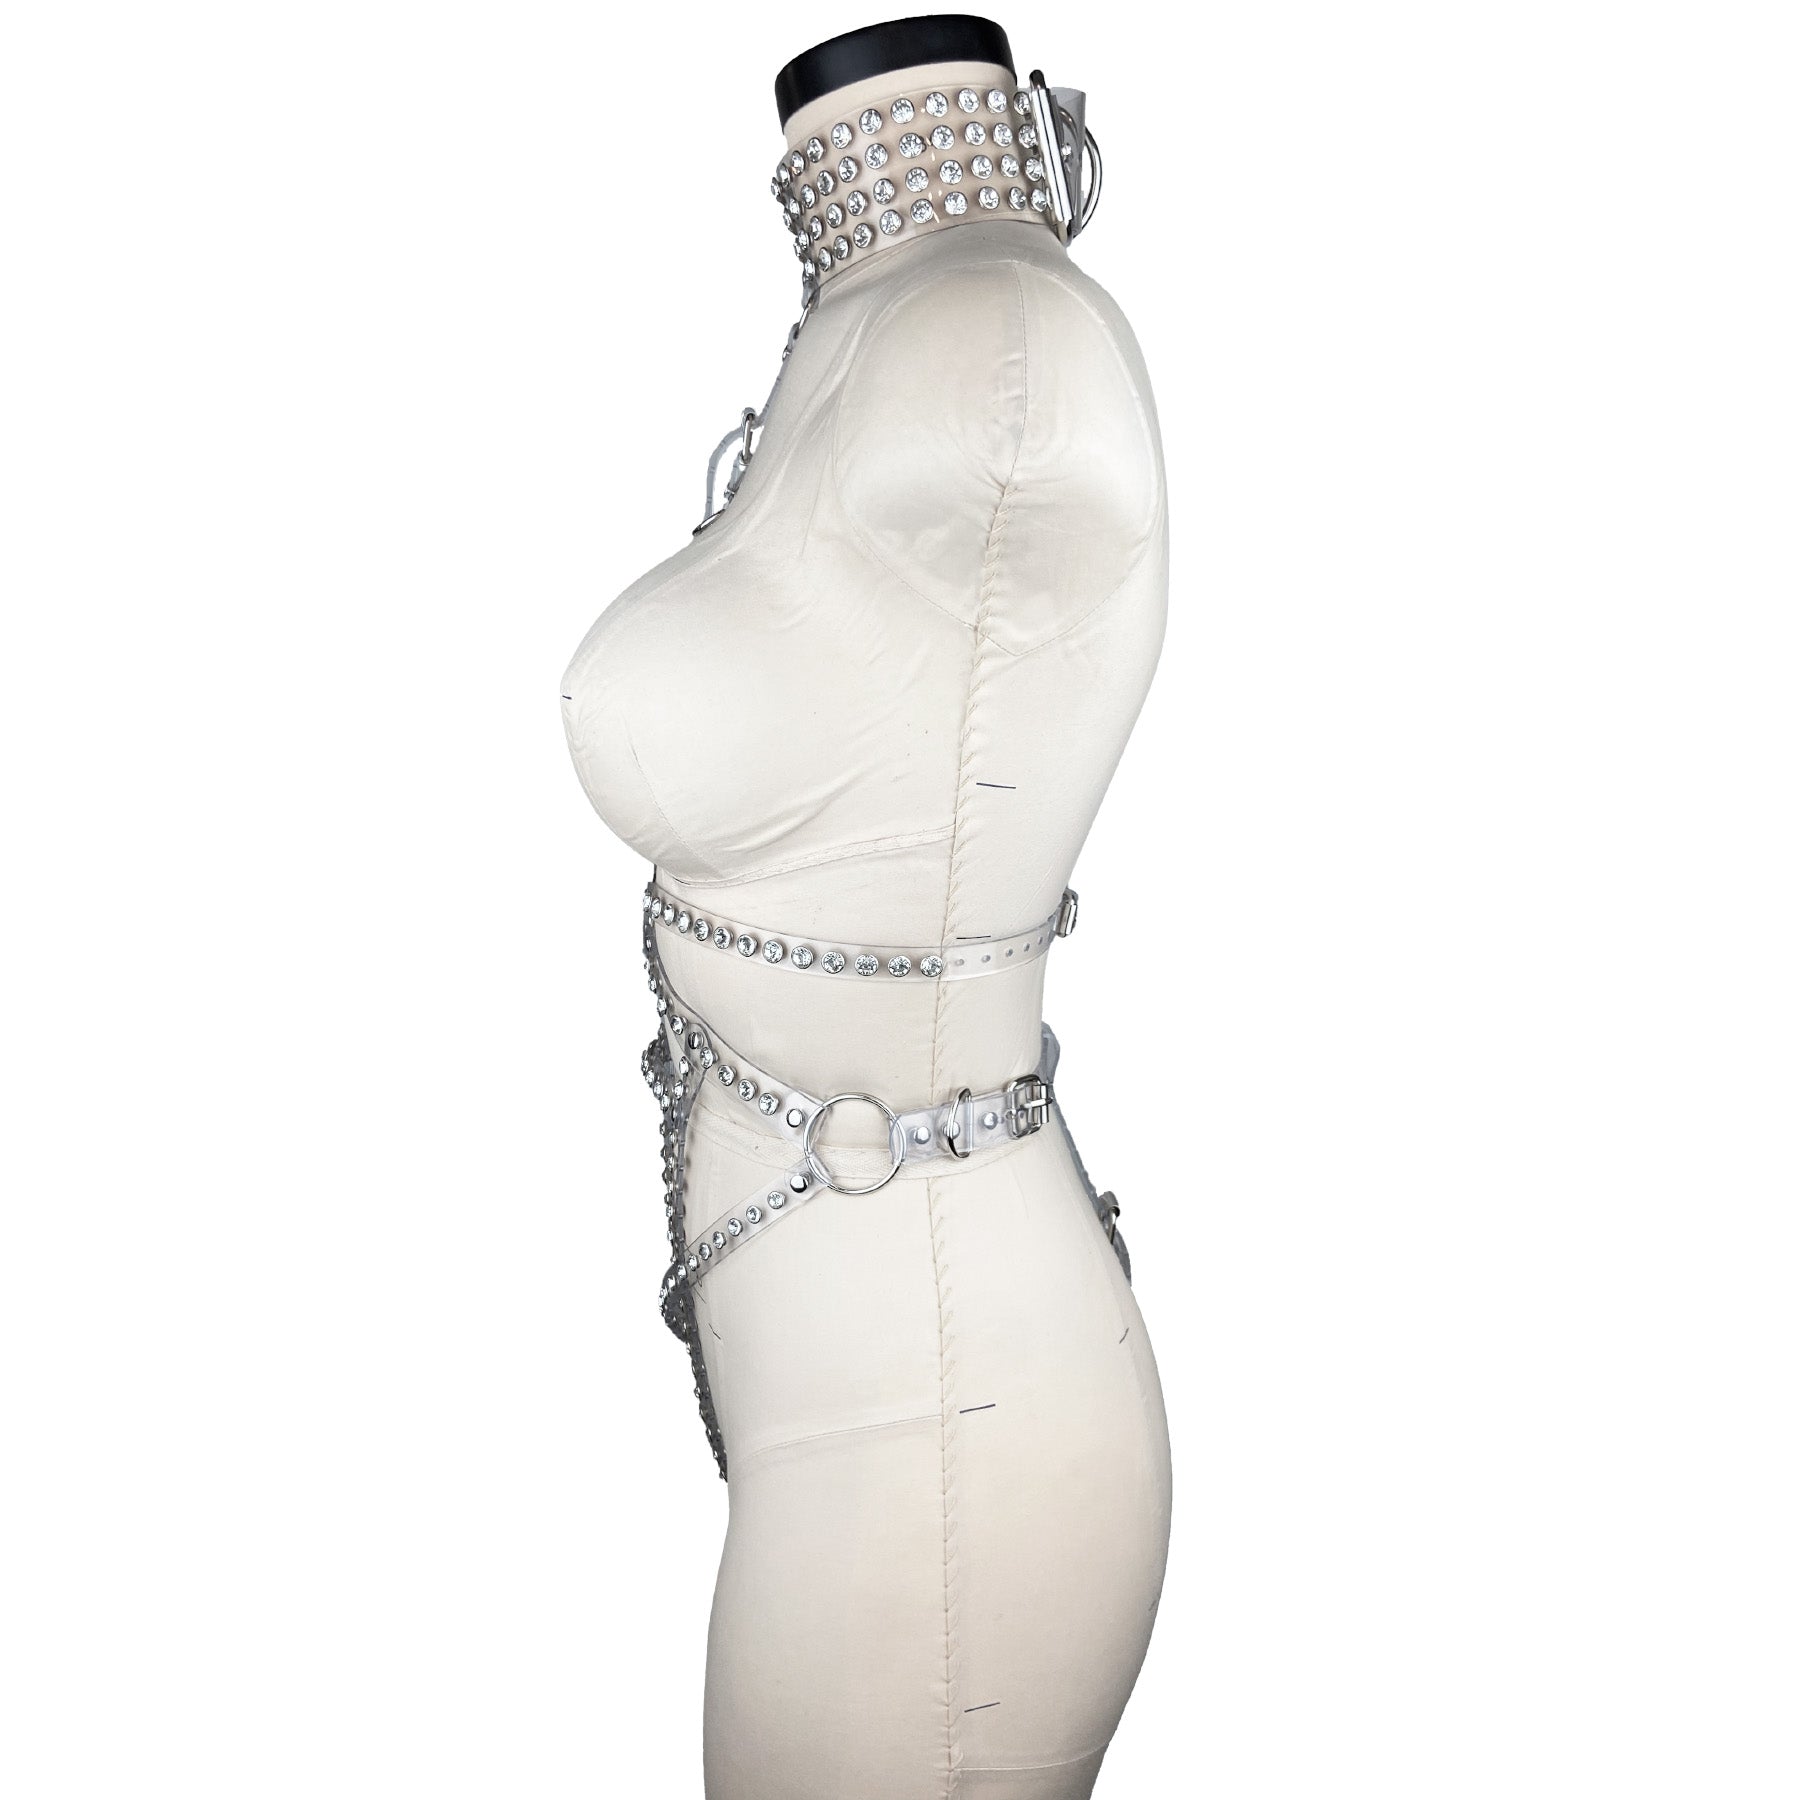 vinyl pvc and crystal fashion and fetish body harness, bespoke, made-to-order in nyc, side view